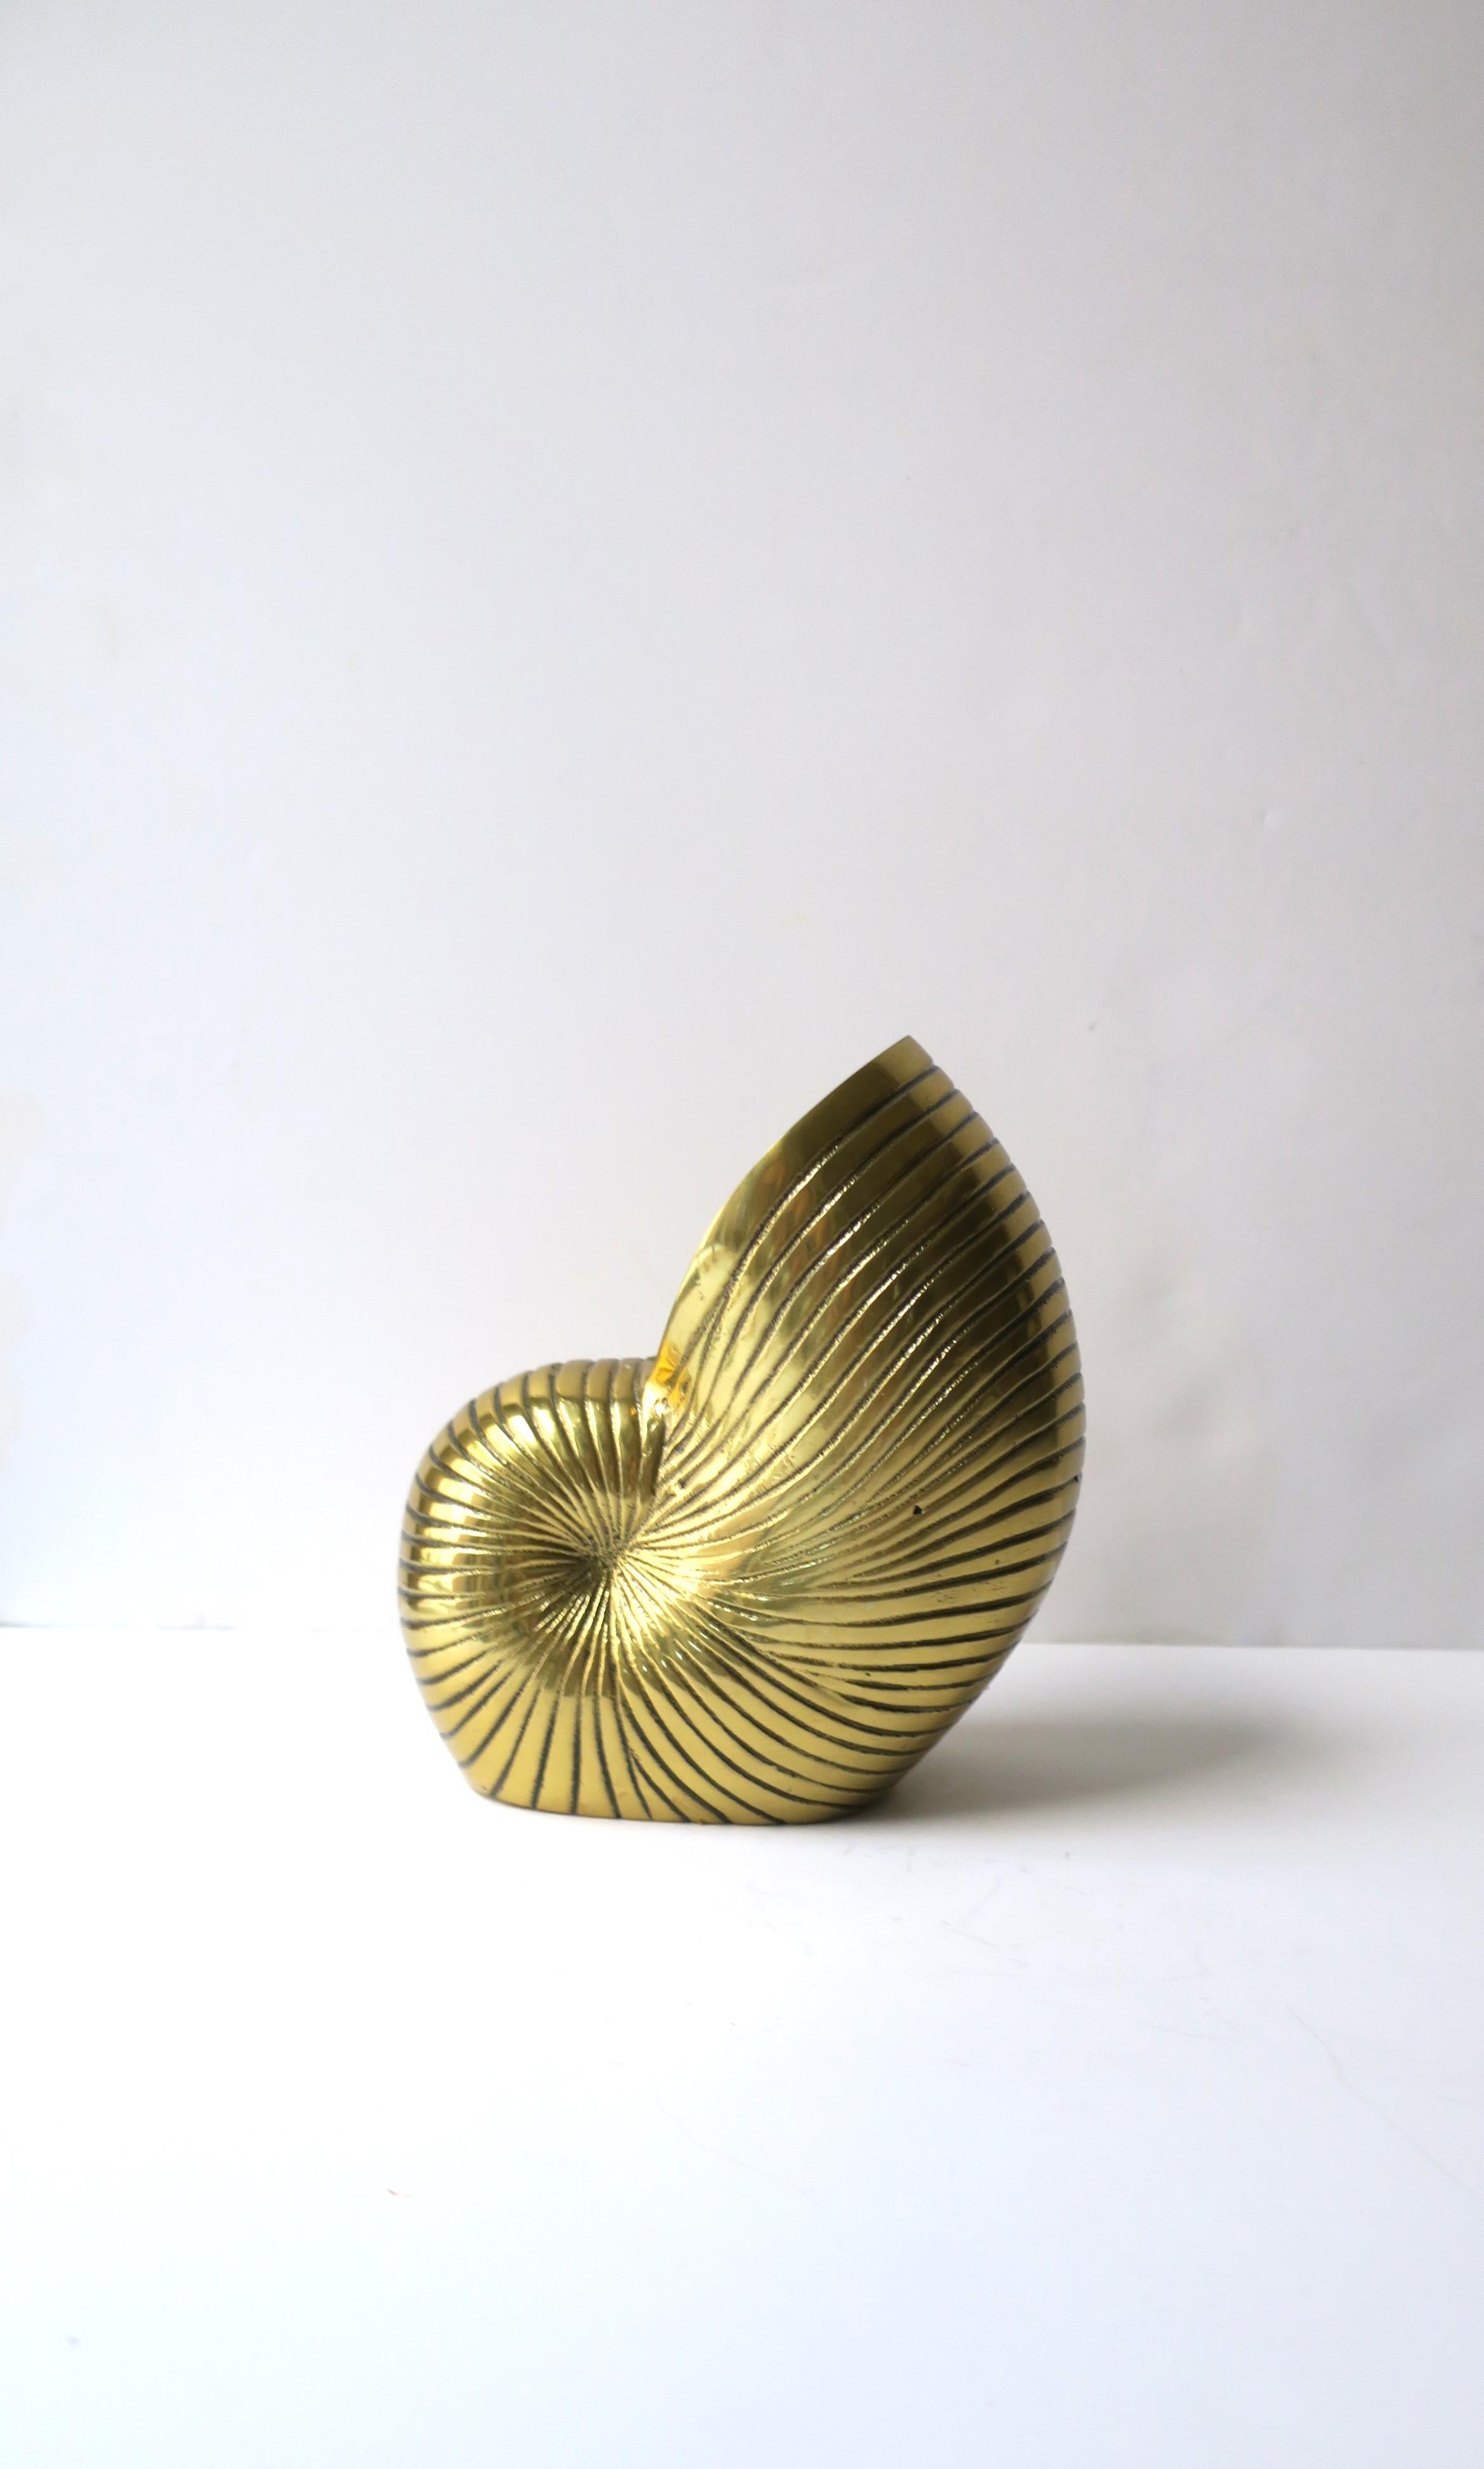 A substantial brass nautilus seashell vase, planter, or decorative object. A great decorative object, planter, or vase for a table, shelf, vanity/bath area, etc. Many uses. Dimensions: 7